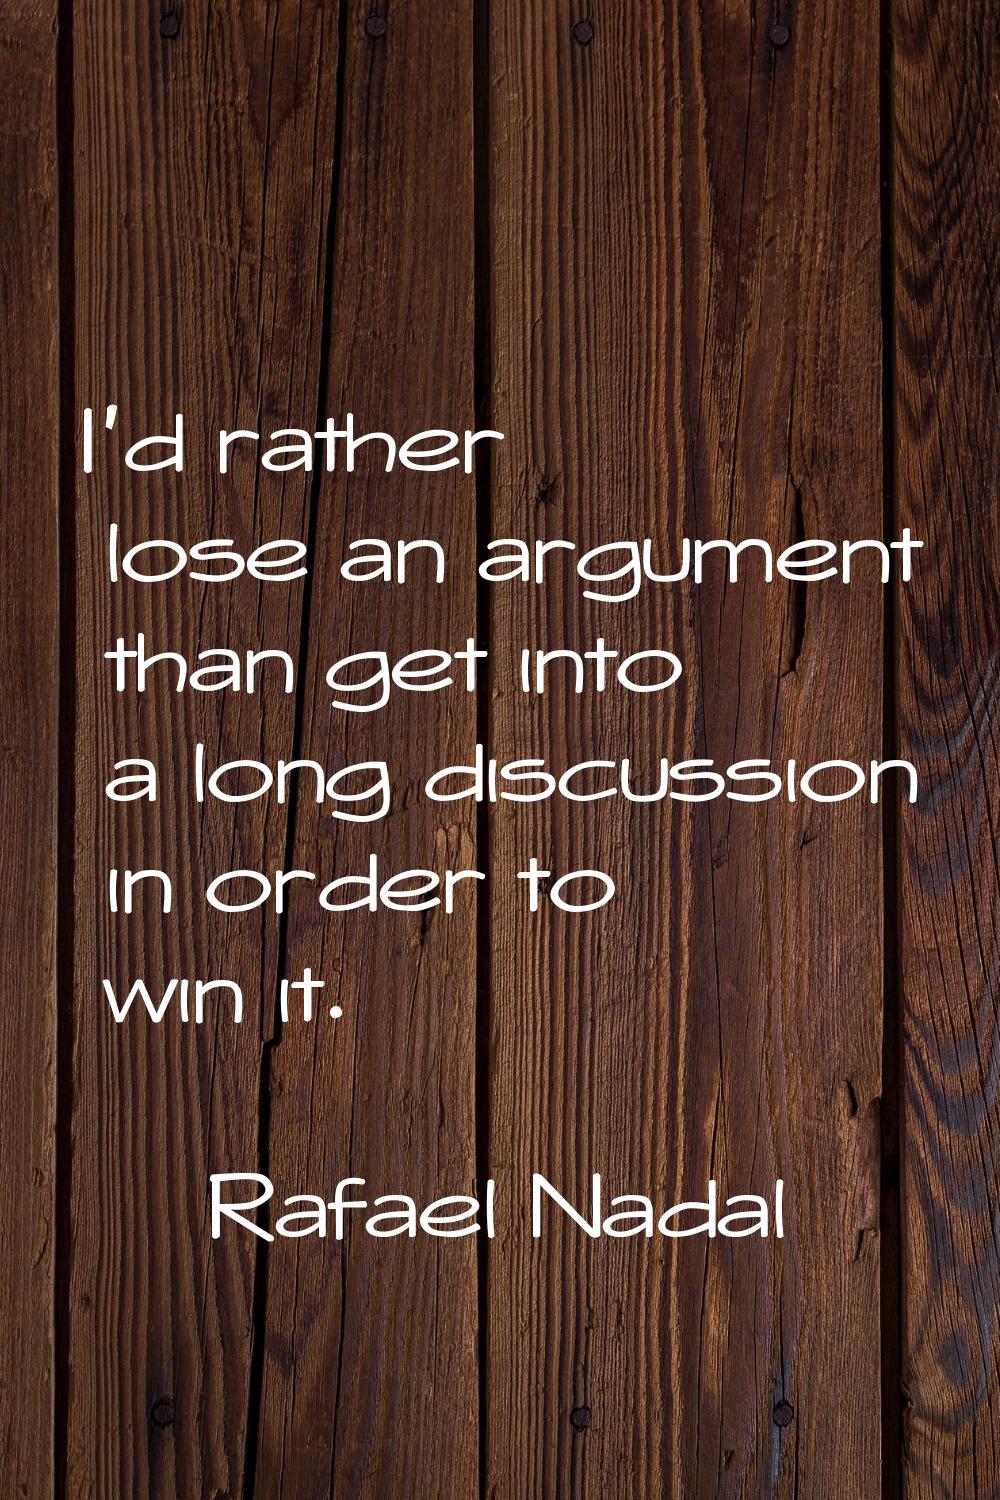 I'd rather lose an argument than get into a long discussion in order to win it.